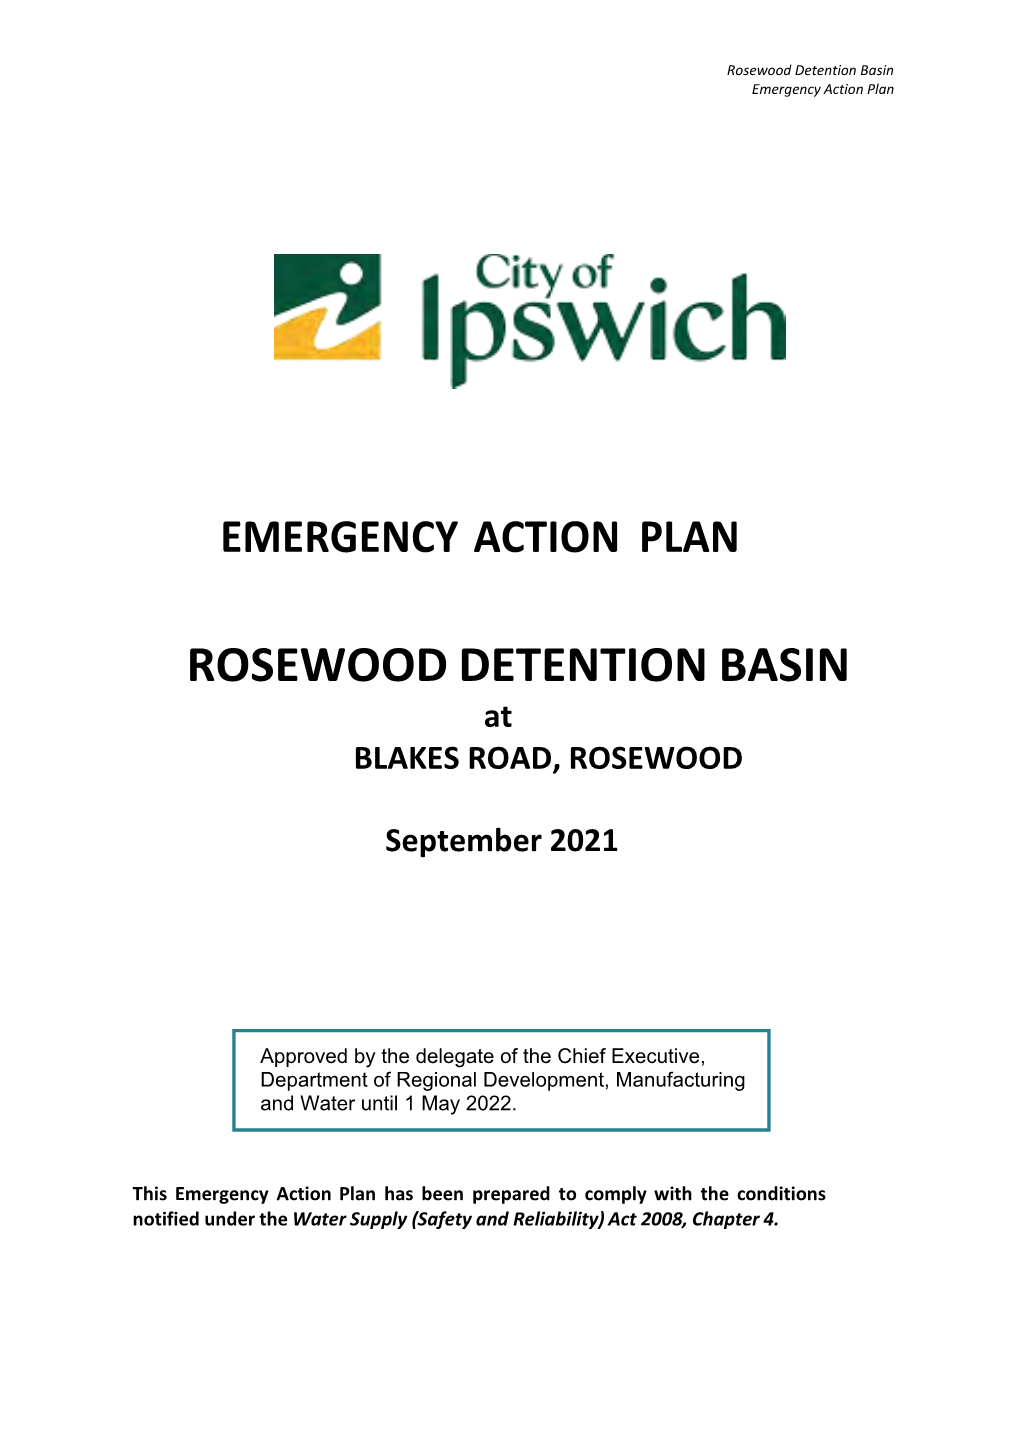 Rosewood Detention Basin Emergency Action Plan